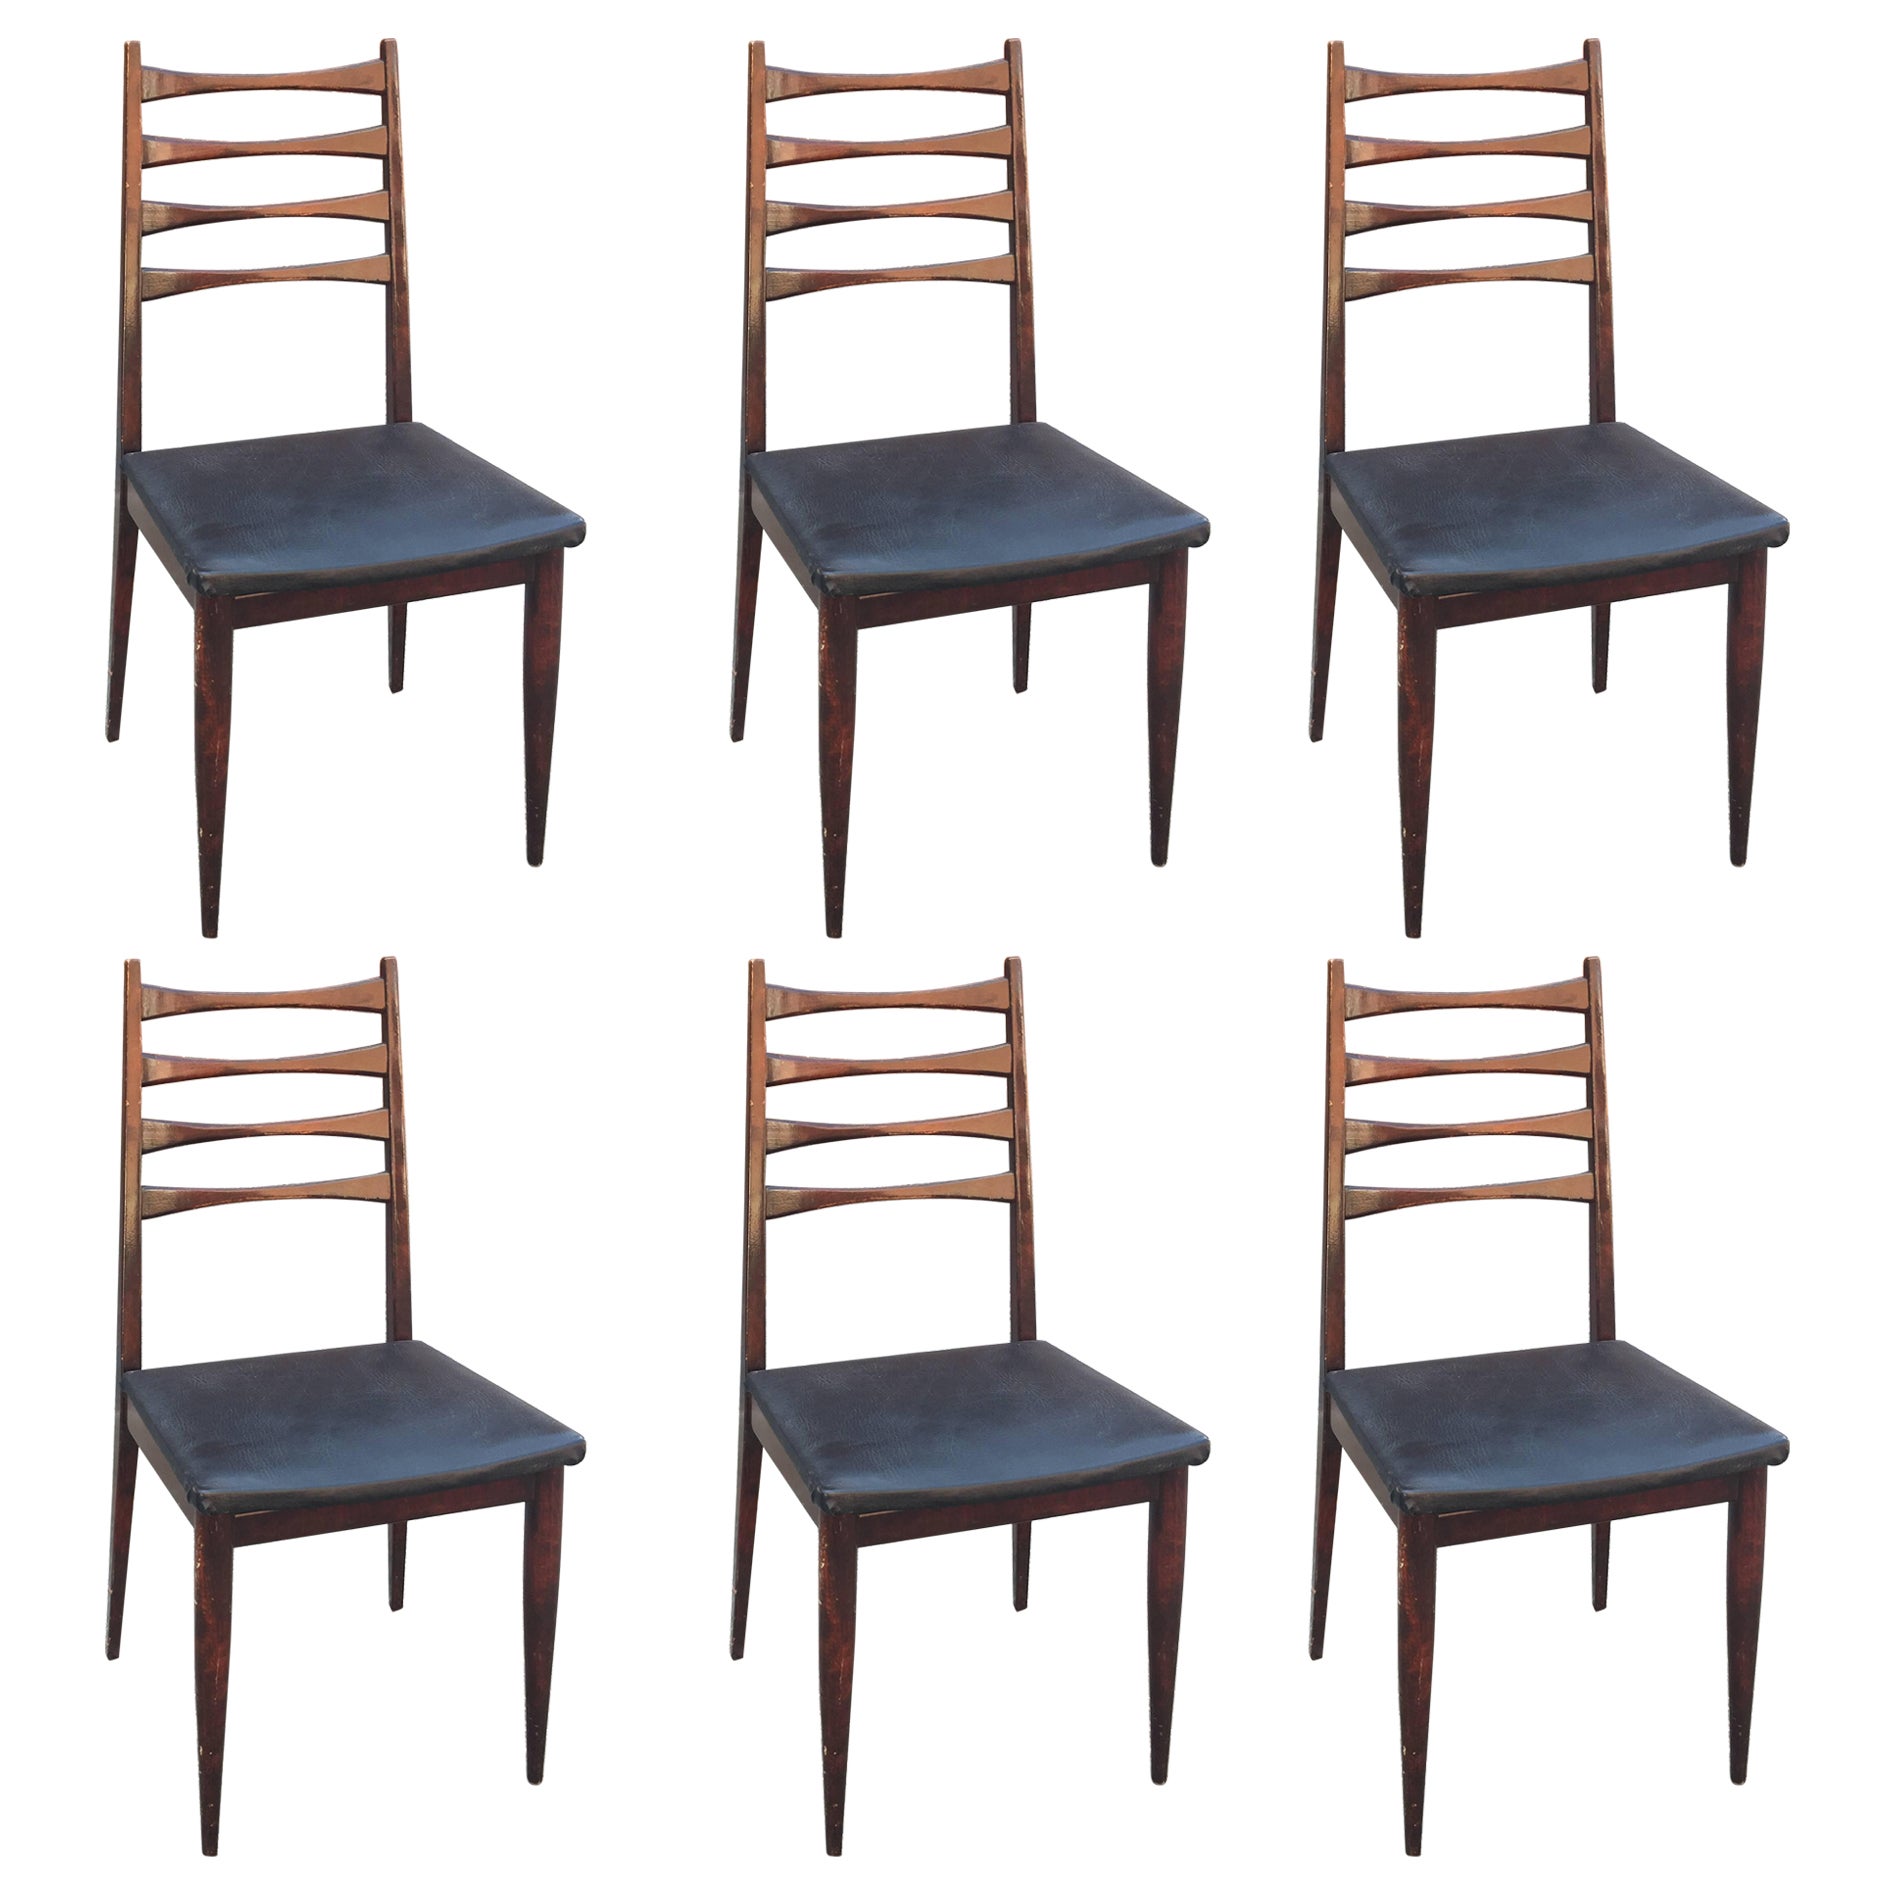 Suite of 6 Scandinavian Style Chairs, circa 1960 For Sale